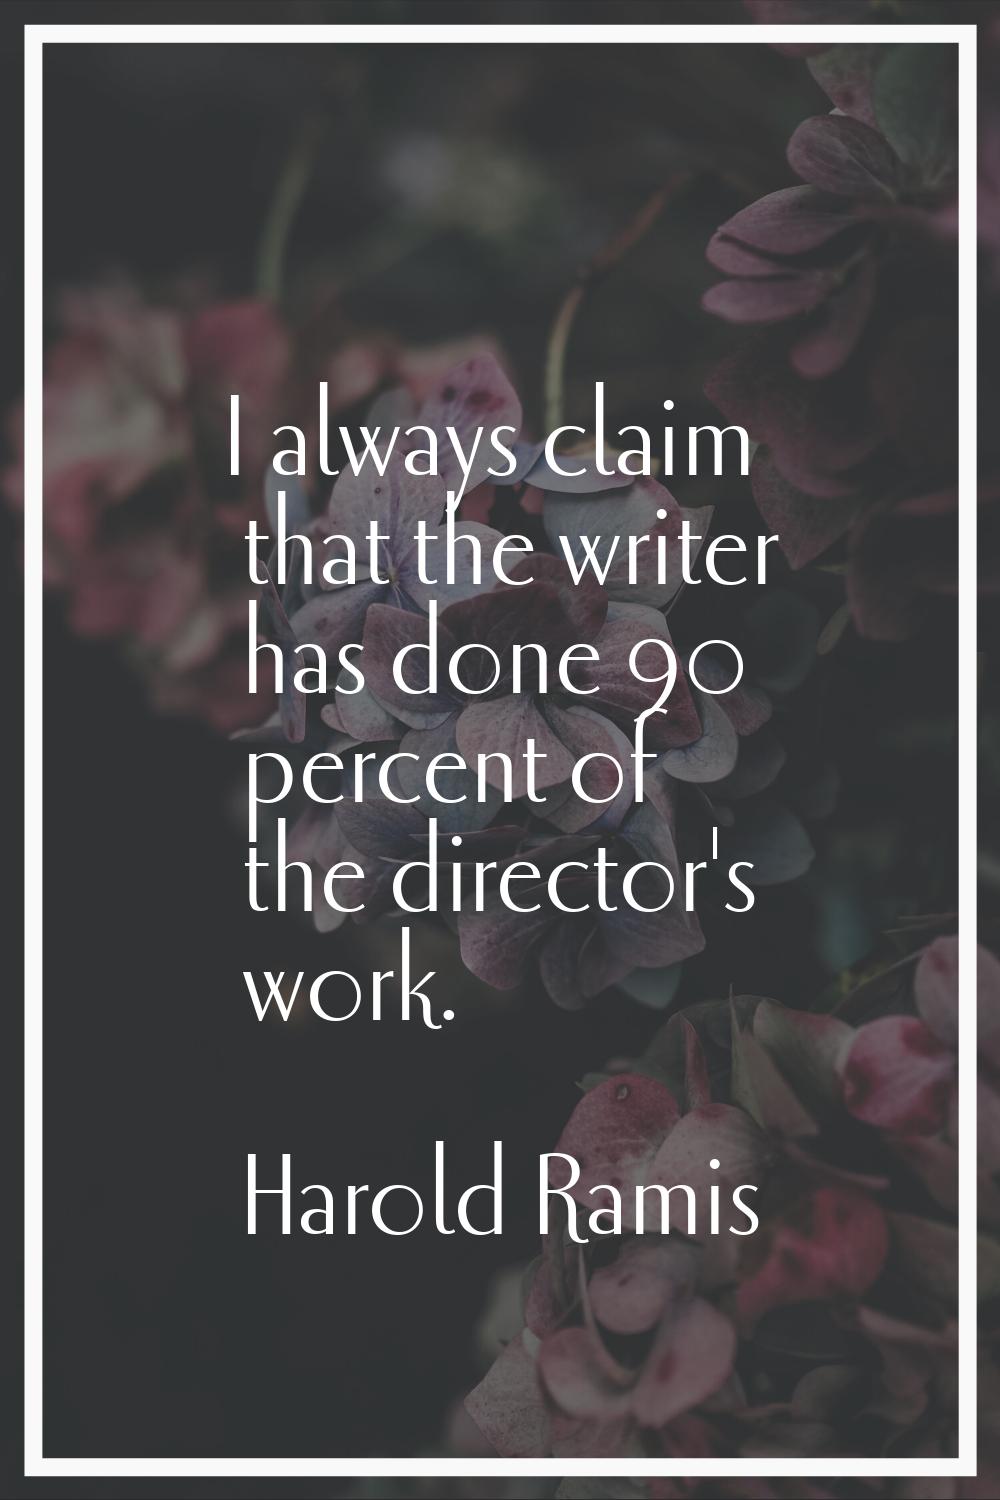 I always claim that the writer has done 90 percent of the director's work.